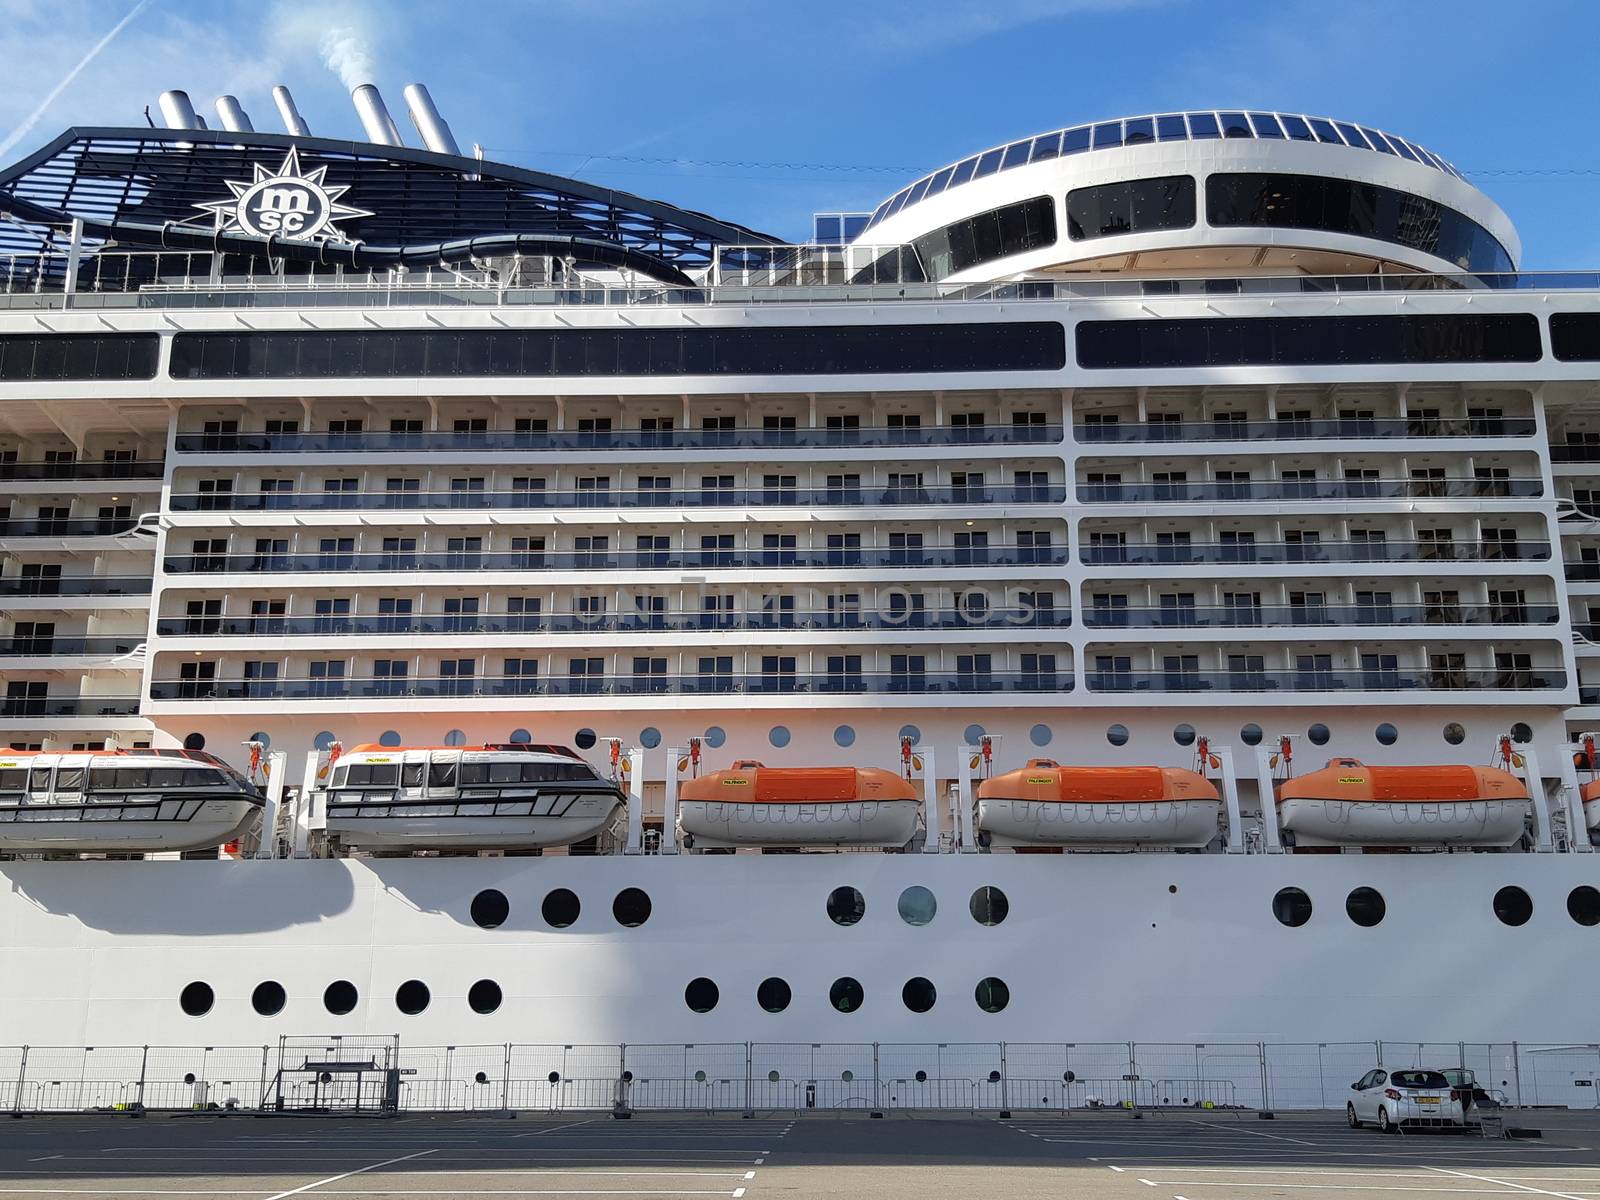 Rotterdam, Netherlands, September 2019: Side view of an MSC Cruise Ship on the quay of Rotterdam Cruise Terminal